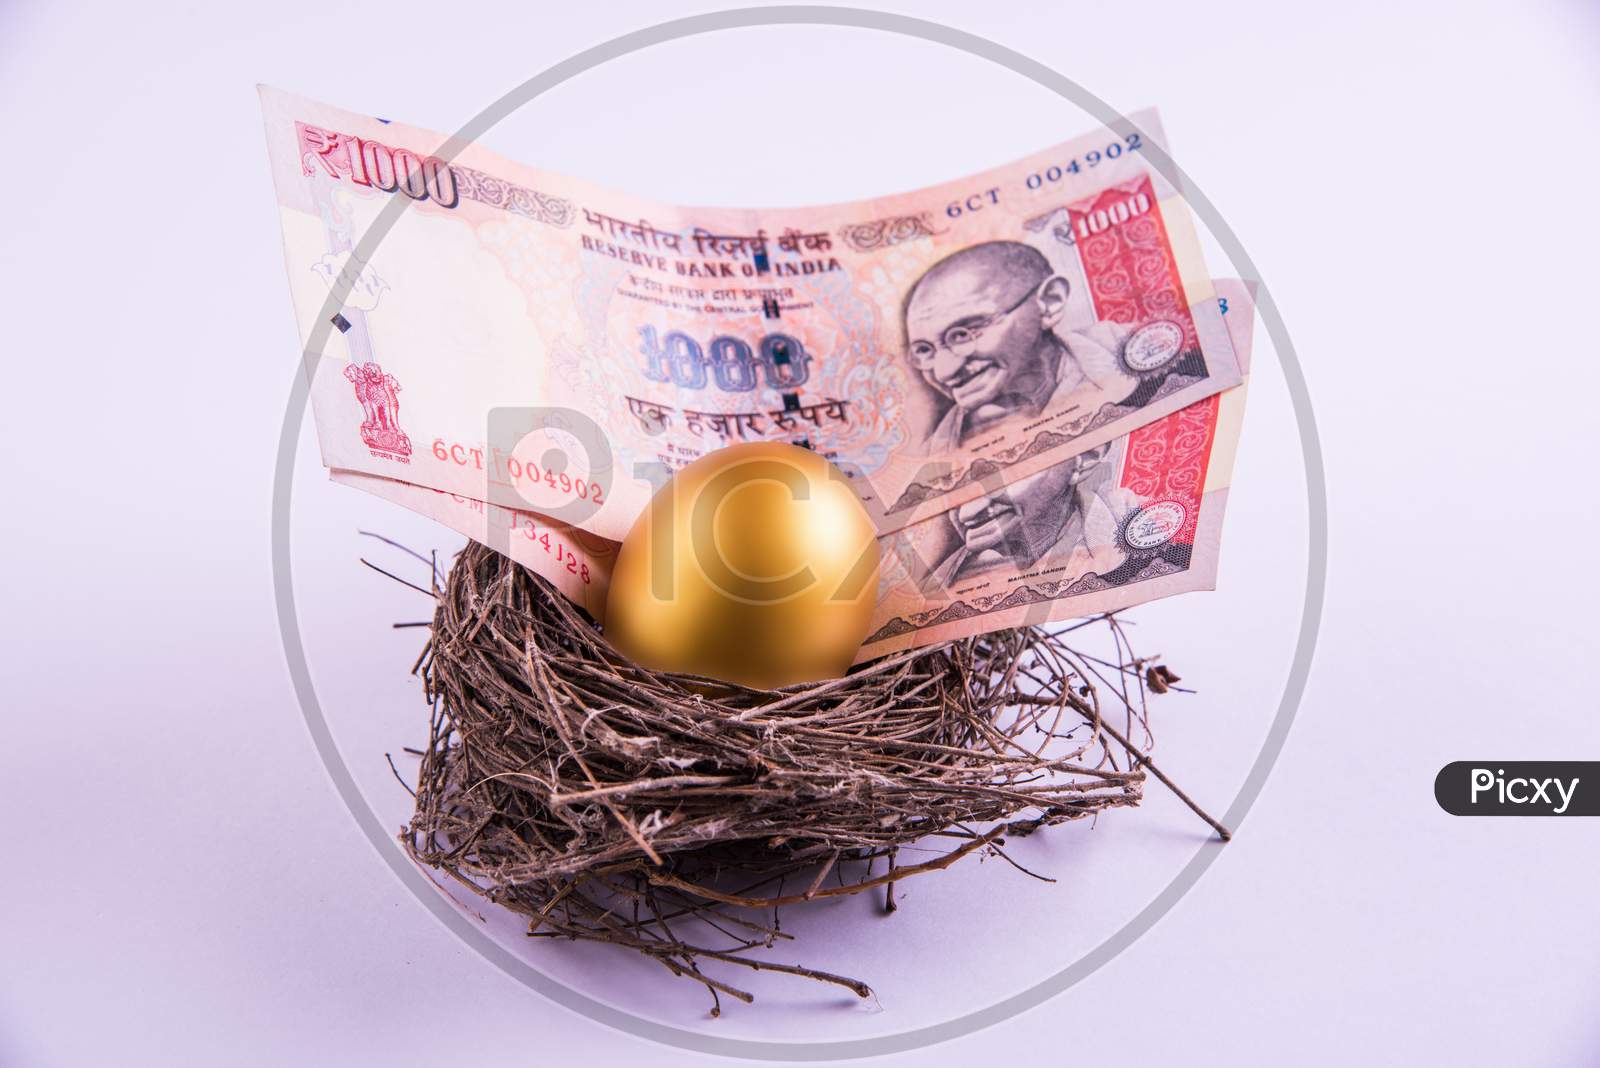 A golden egg sitting in a nest kept over indian currency notes